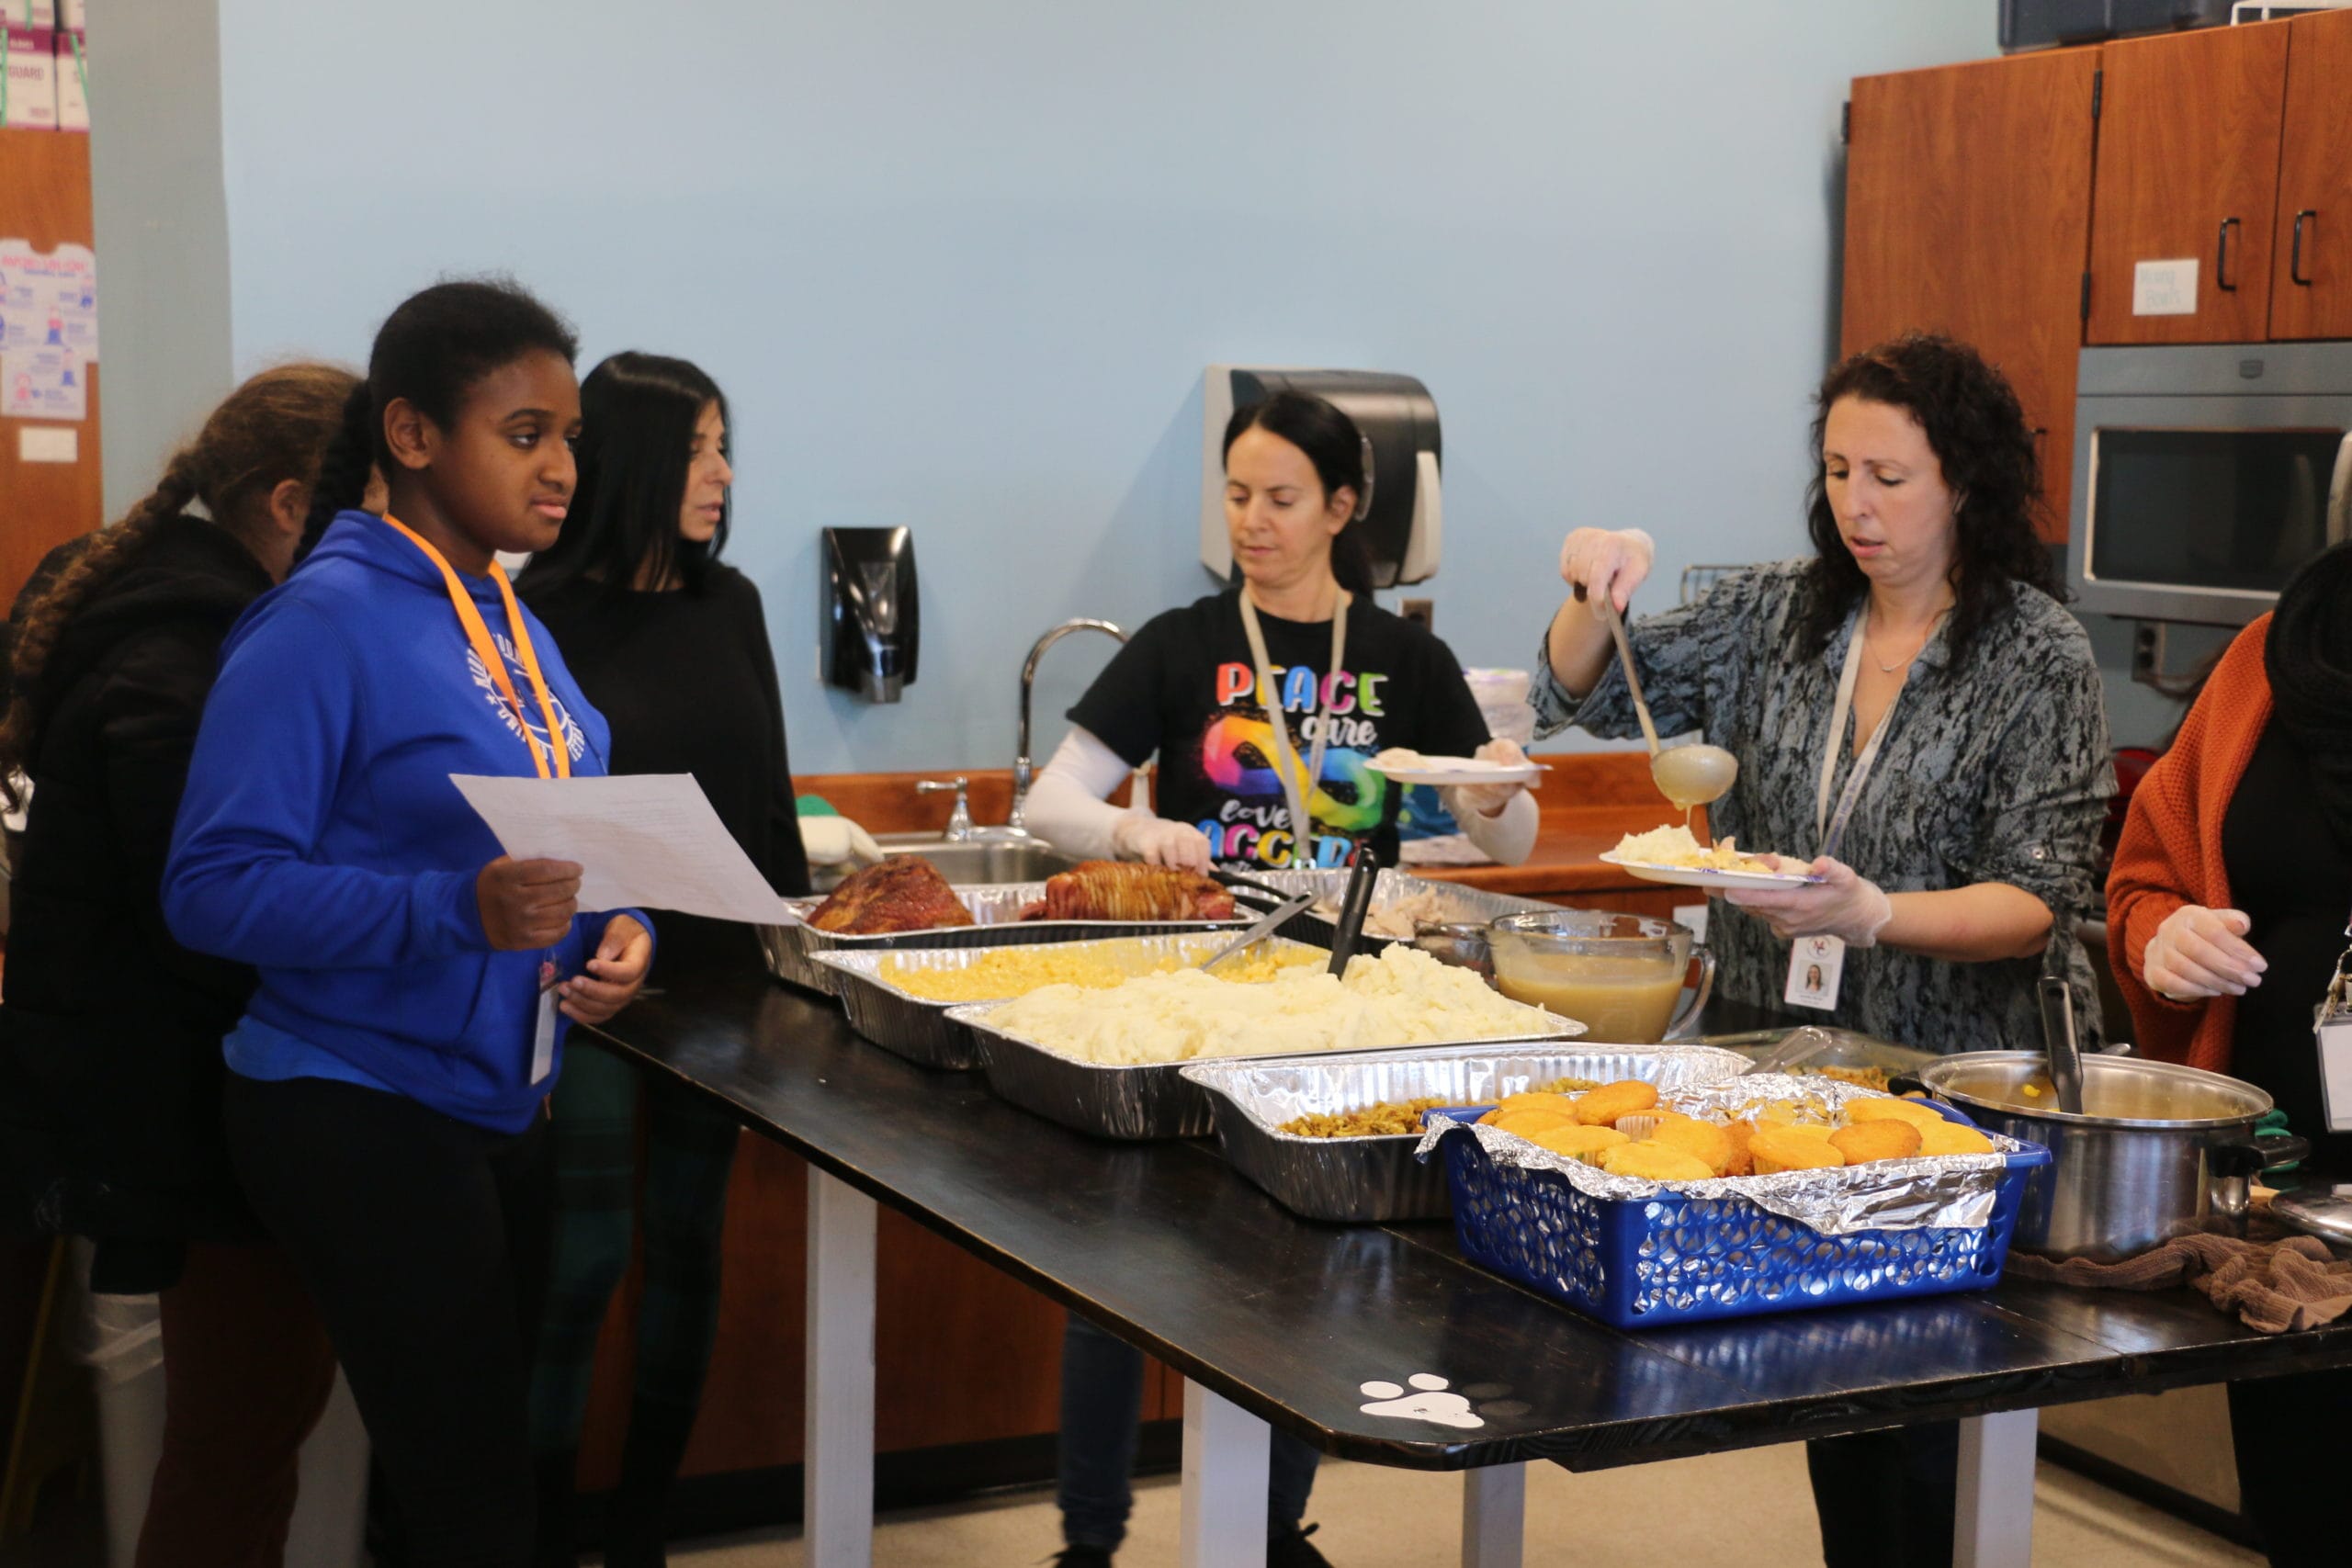 Centereach High School Life Skills Class Cooks Holiday Meal